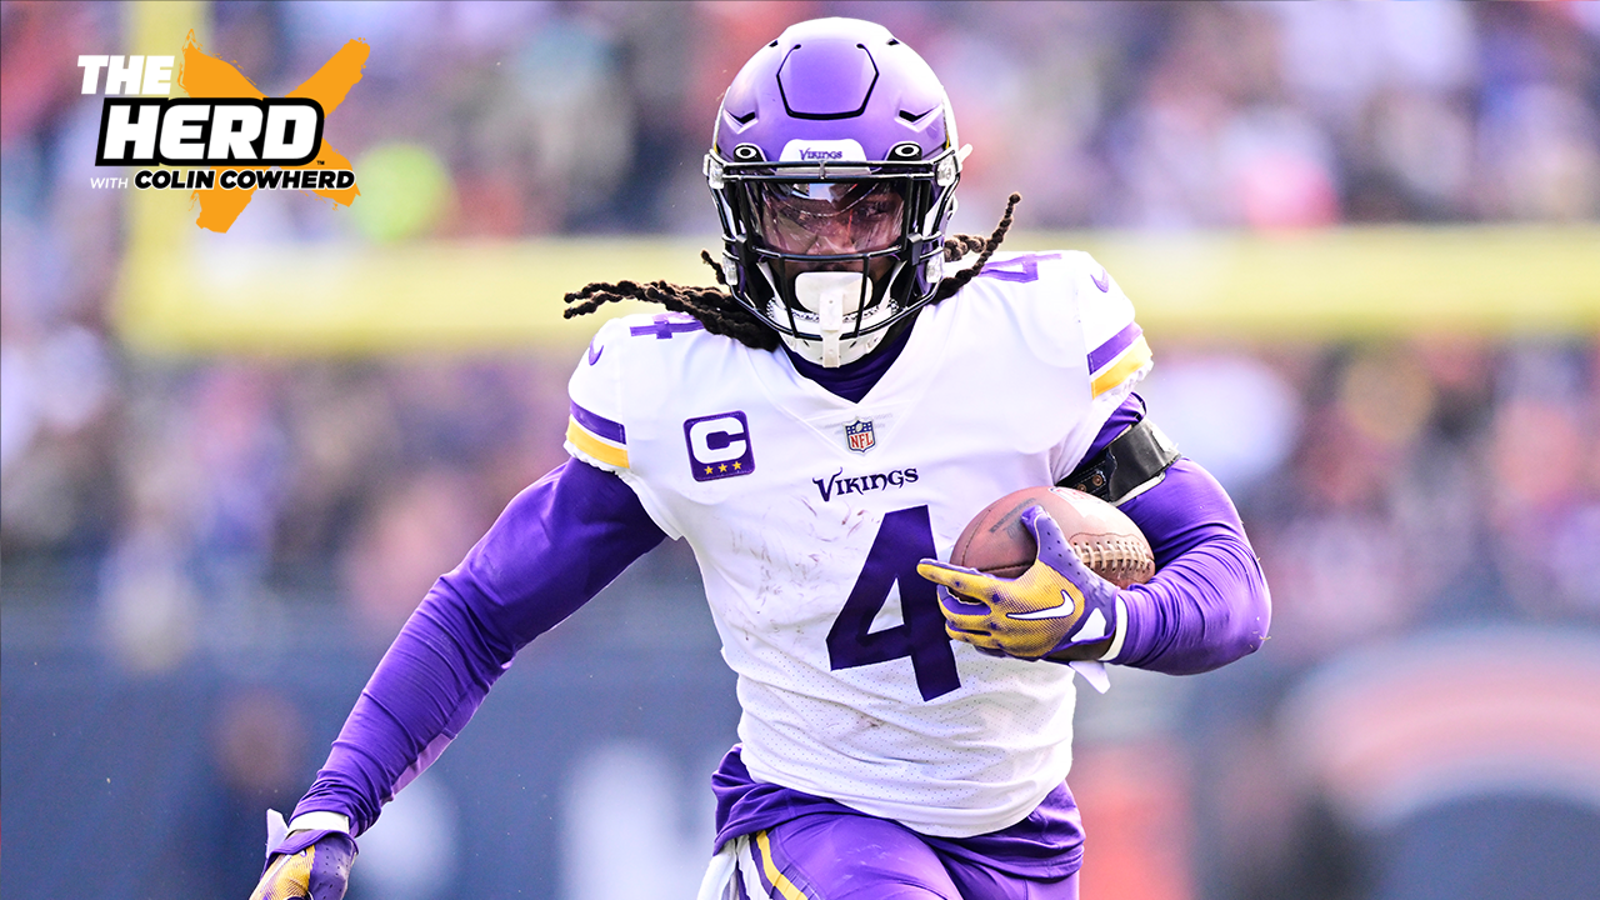 Free-agent RB Dalvin Cook might wait until July to sign